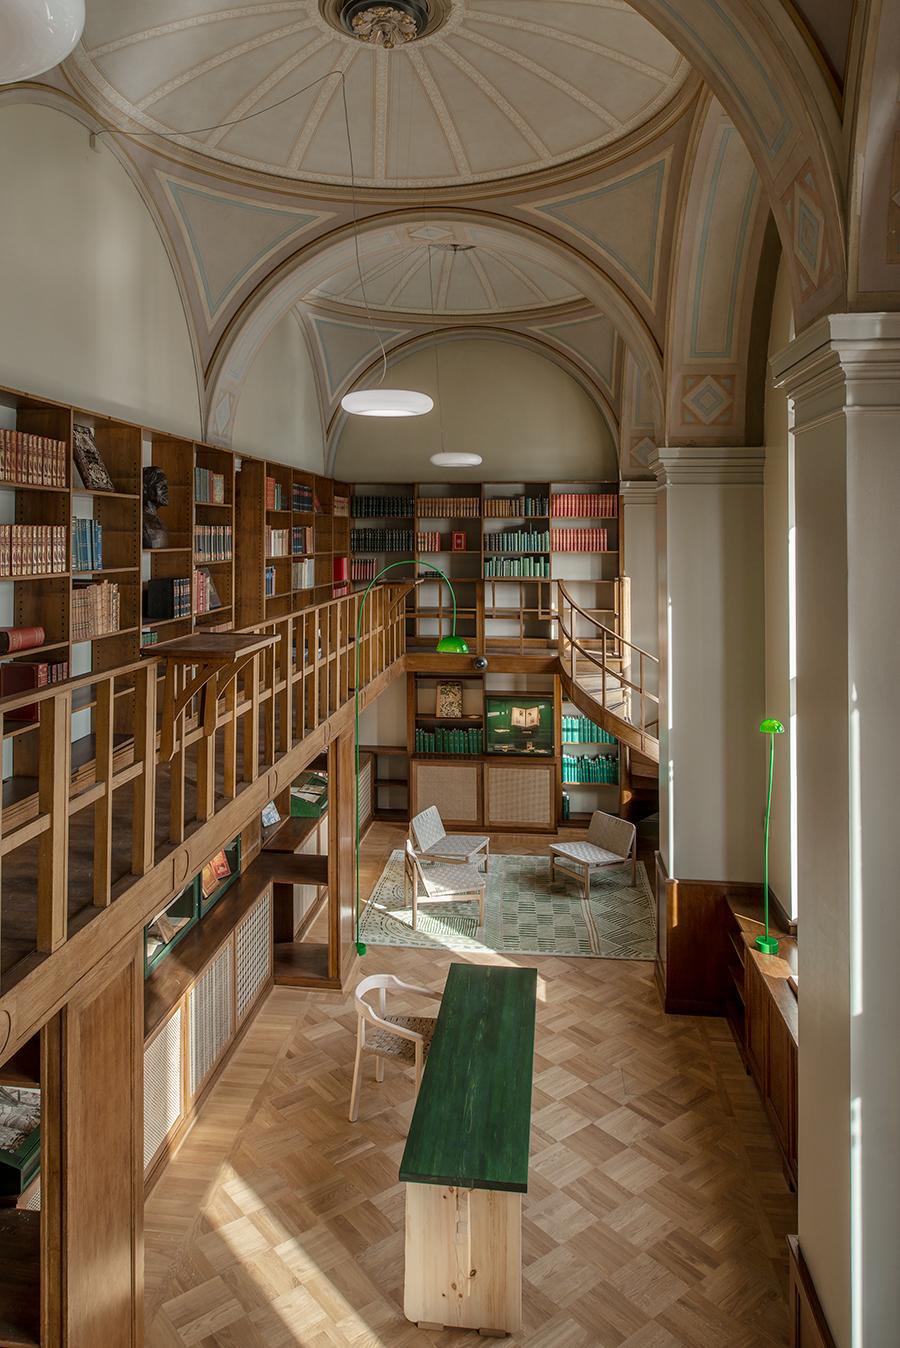 A Look at Emma Olbers’ New Designs for the Old Library of Stockholm’s Nationalmuseum